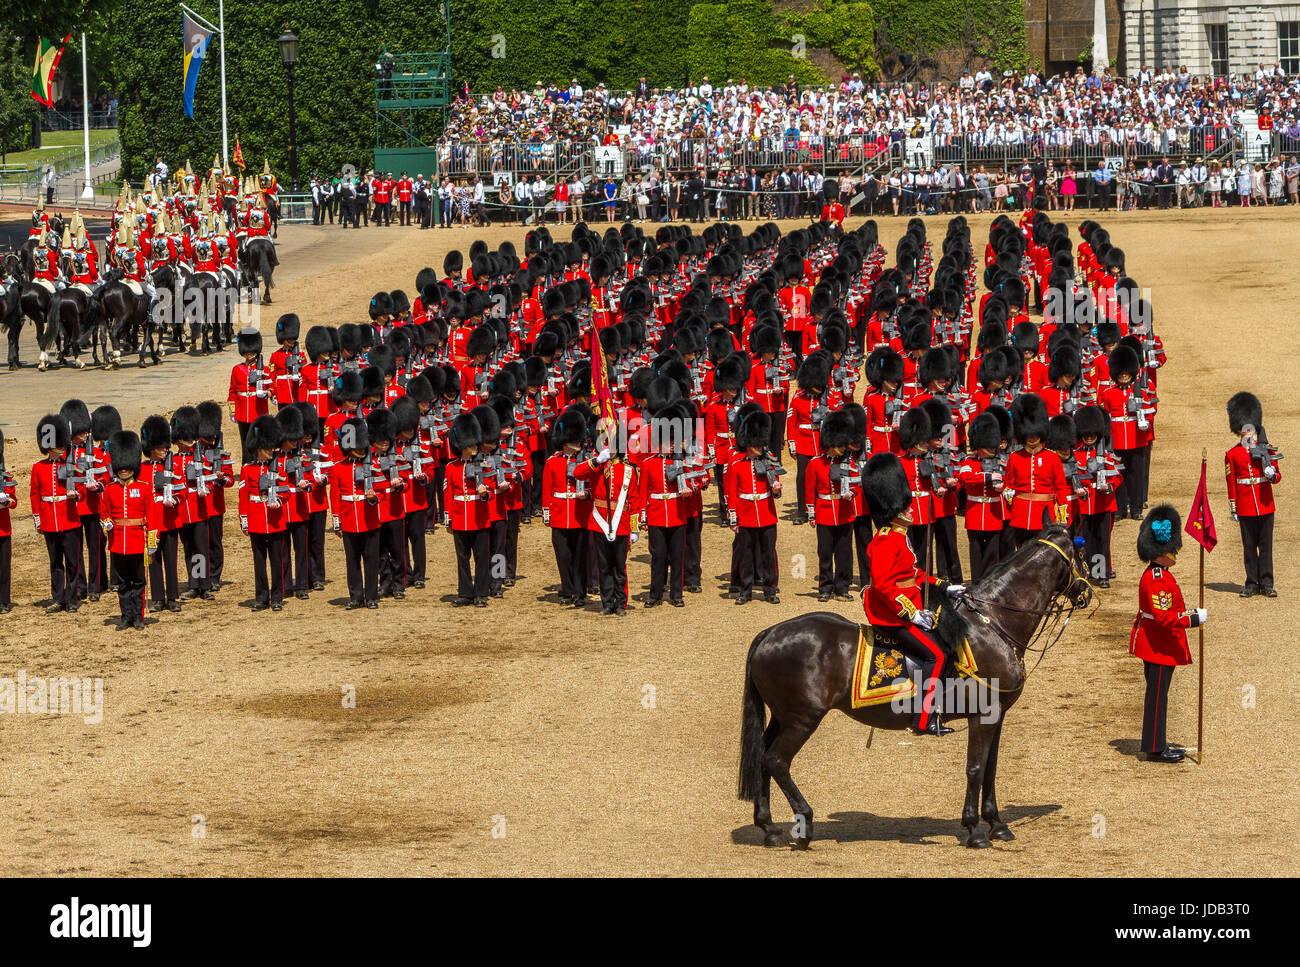 The Irish Guards stand in formation at Trooping The Colour or Queens Birthday Parade at Horse Guards Parade, London ,UK, 2017 Stock Photo